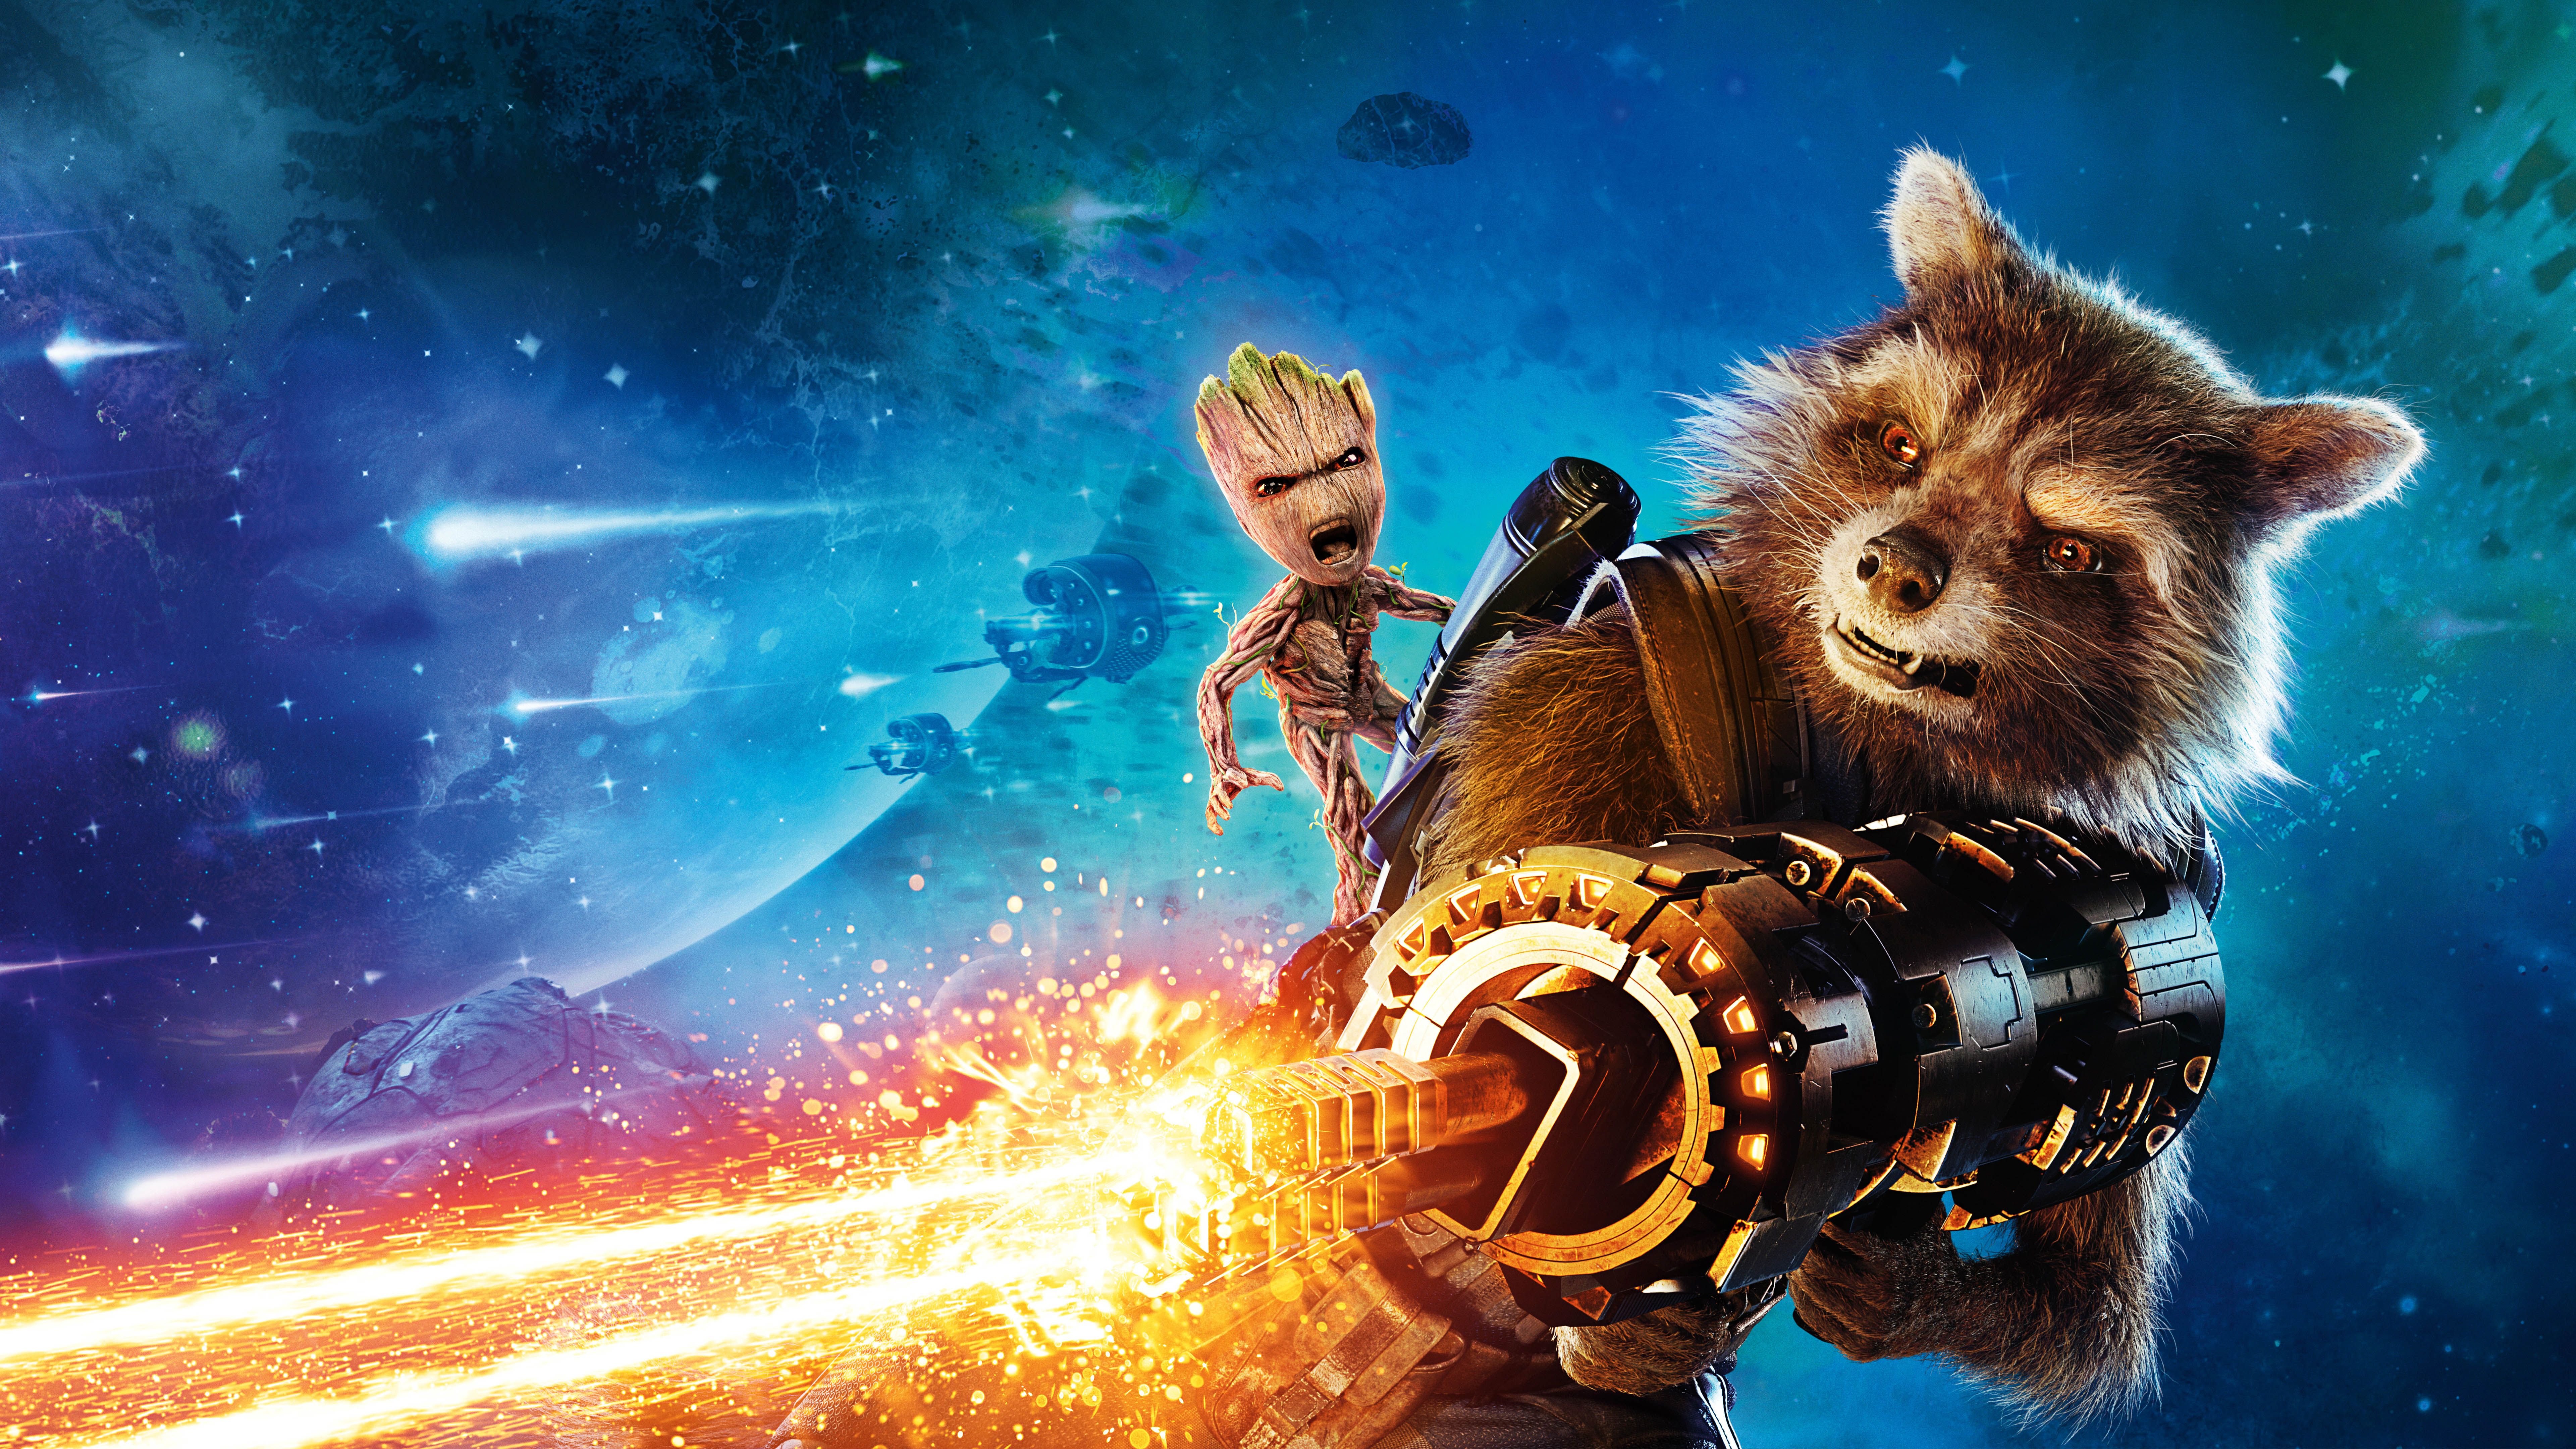 Guardians of the Galaxy Desktop Background. Guardians Galaxy Wallpaper, Guardians of the Galaxy Wallpaper and Rise of the Guardians Wallpaper